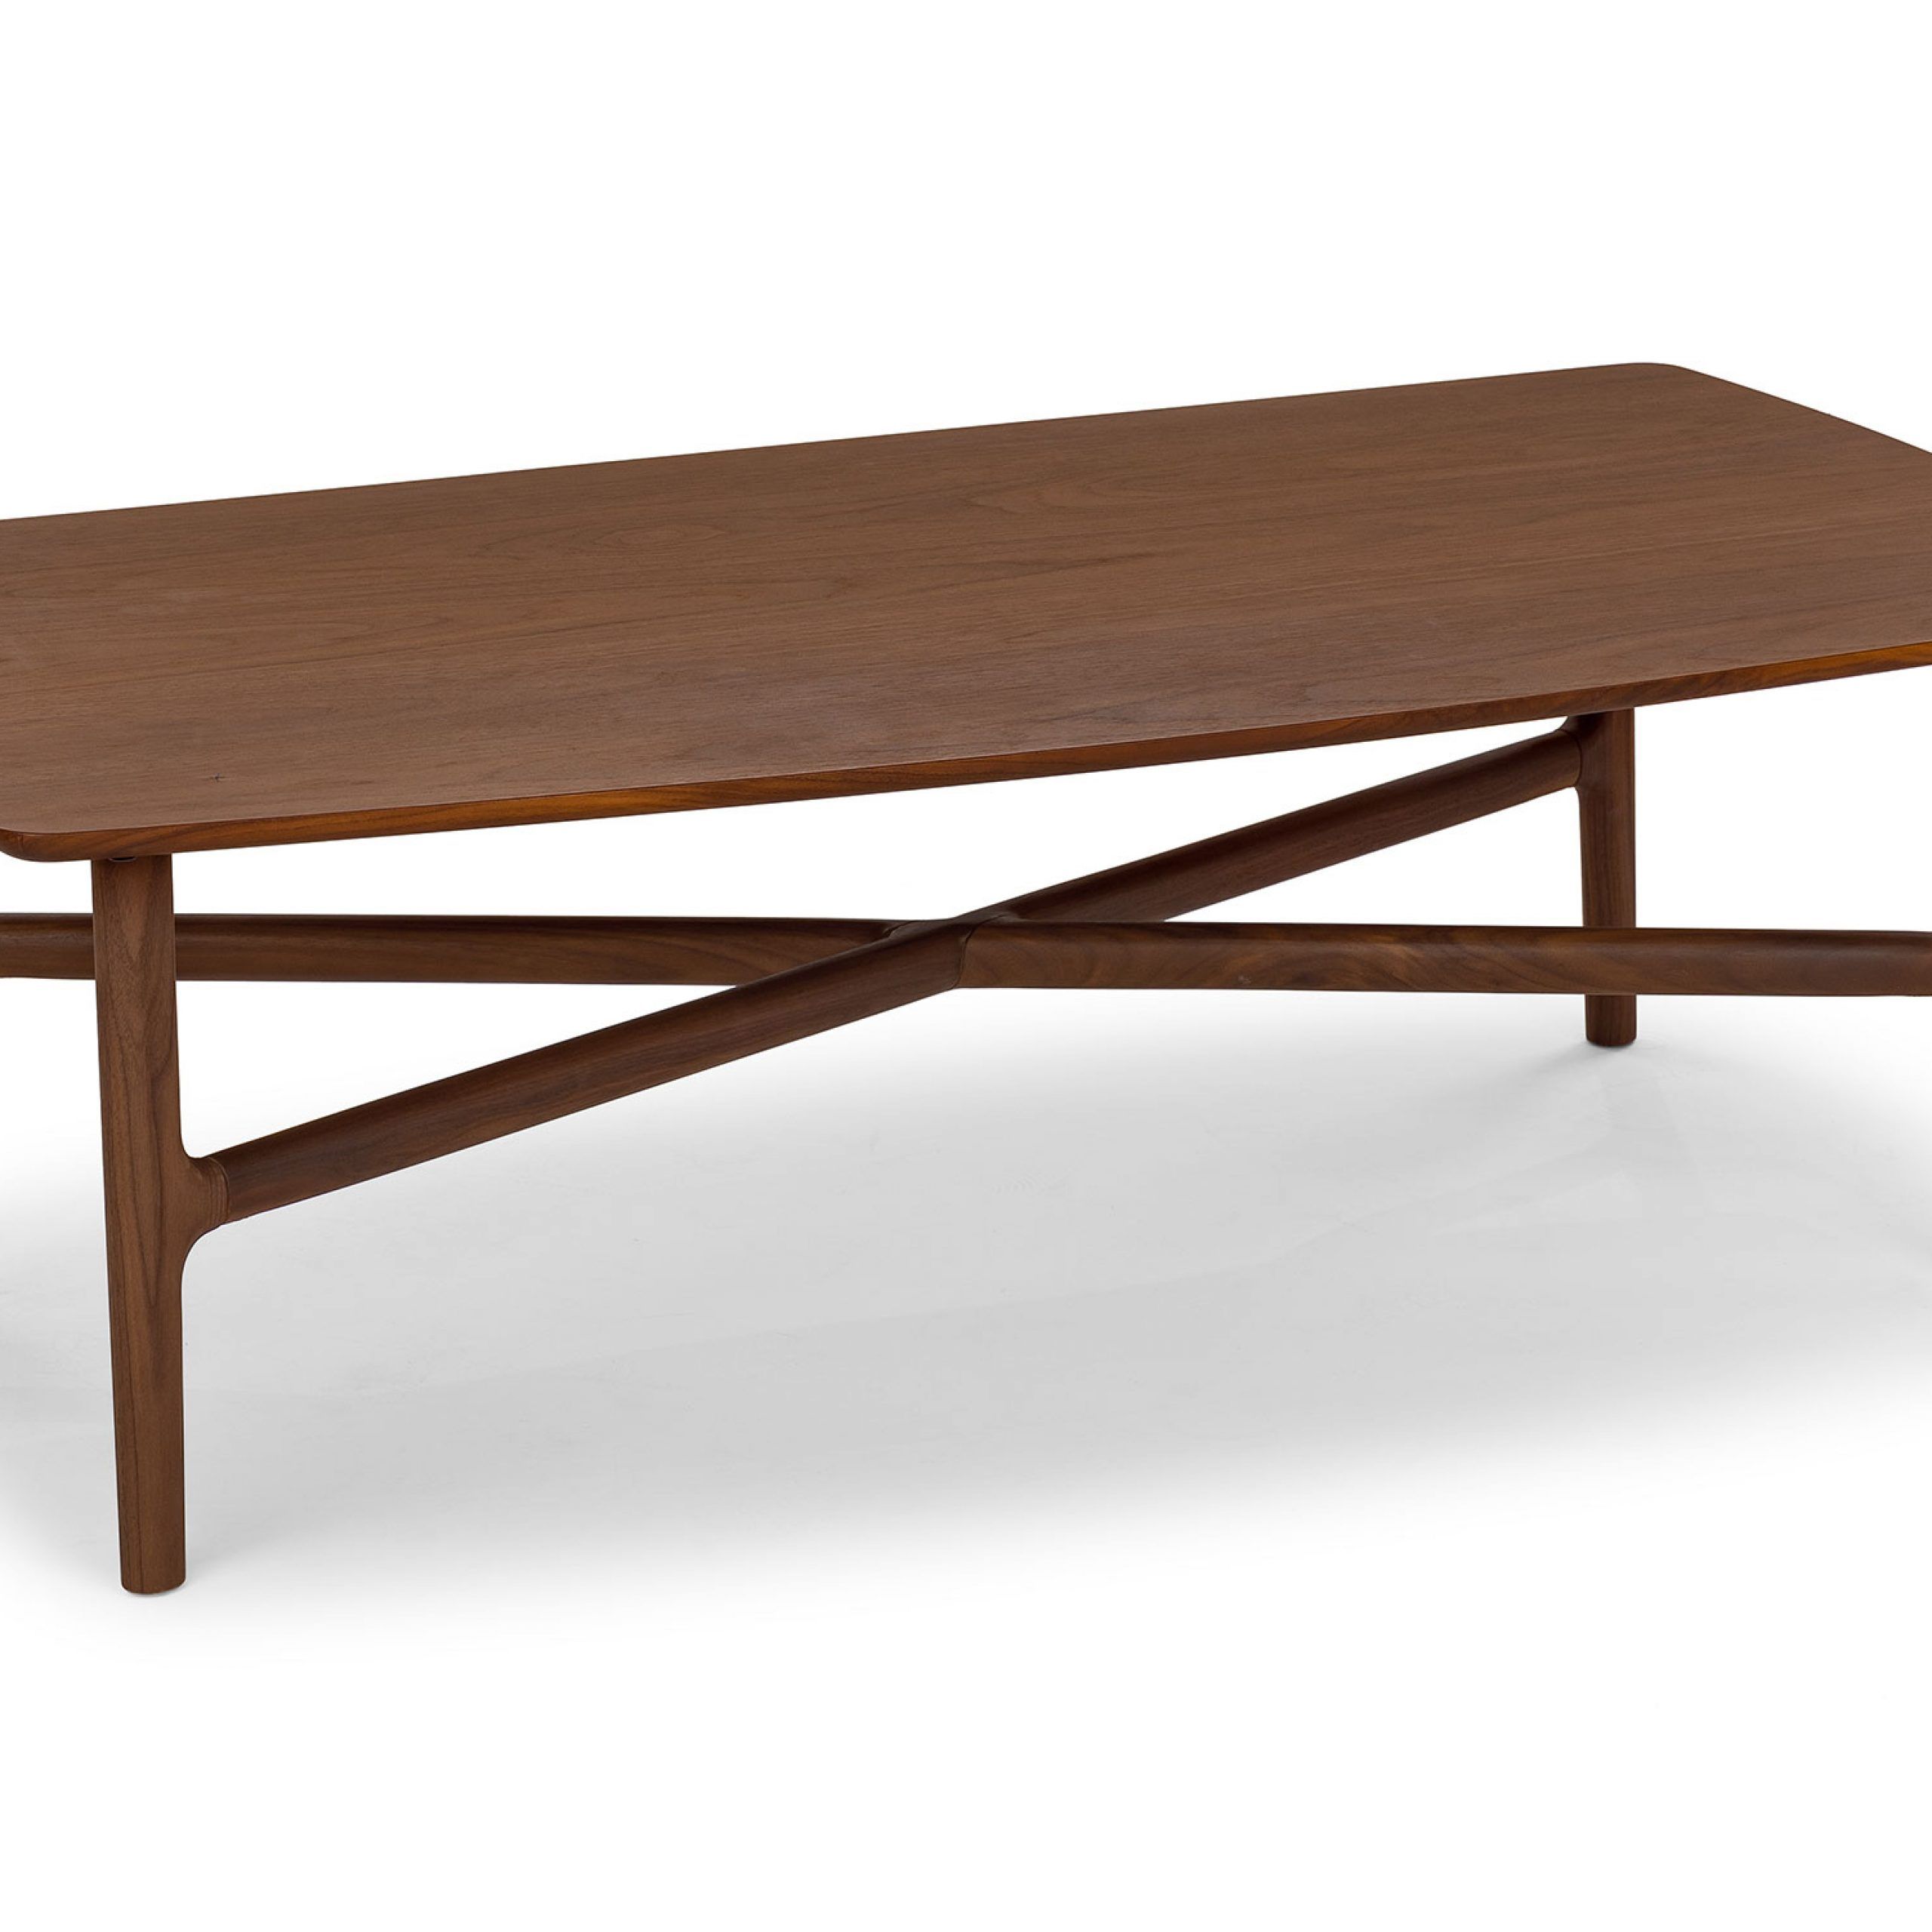 Brezza Matte Walnut Rectangular Coffee Table | Article For Walnut Coffee Tables (View 16 of 20)